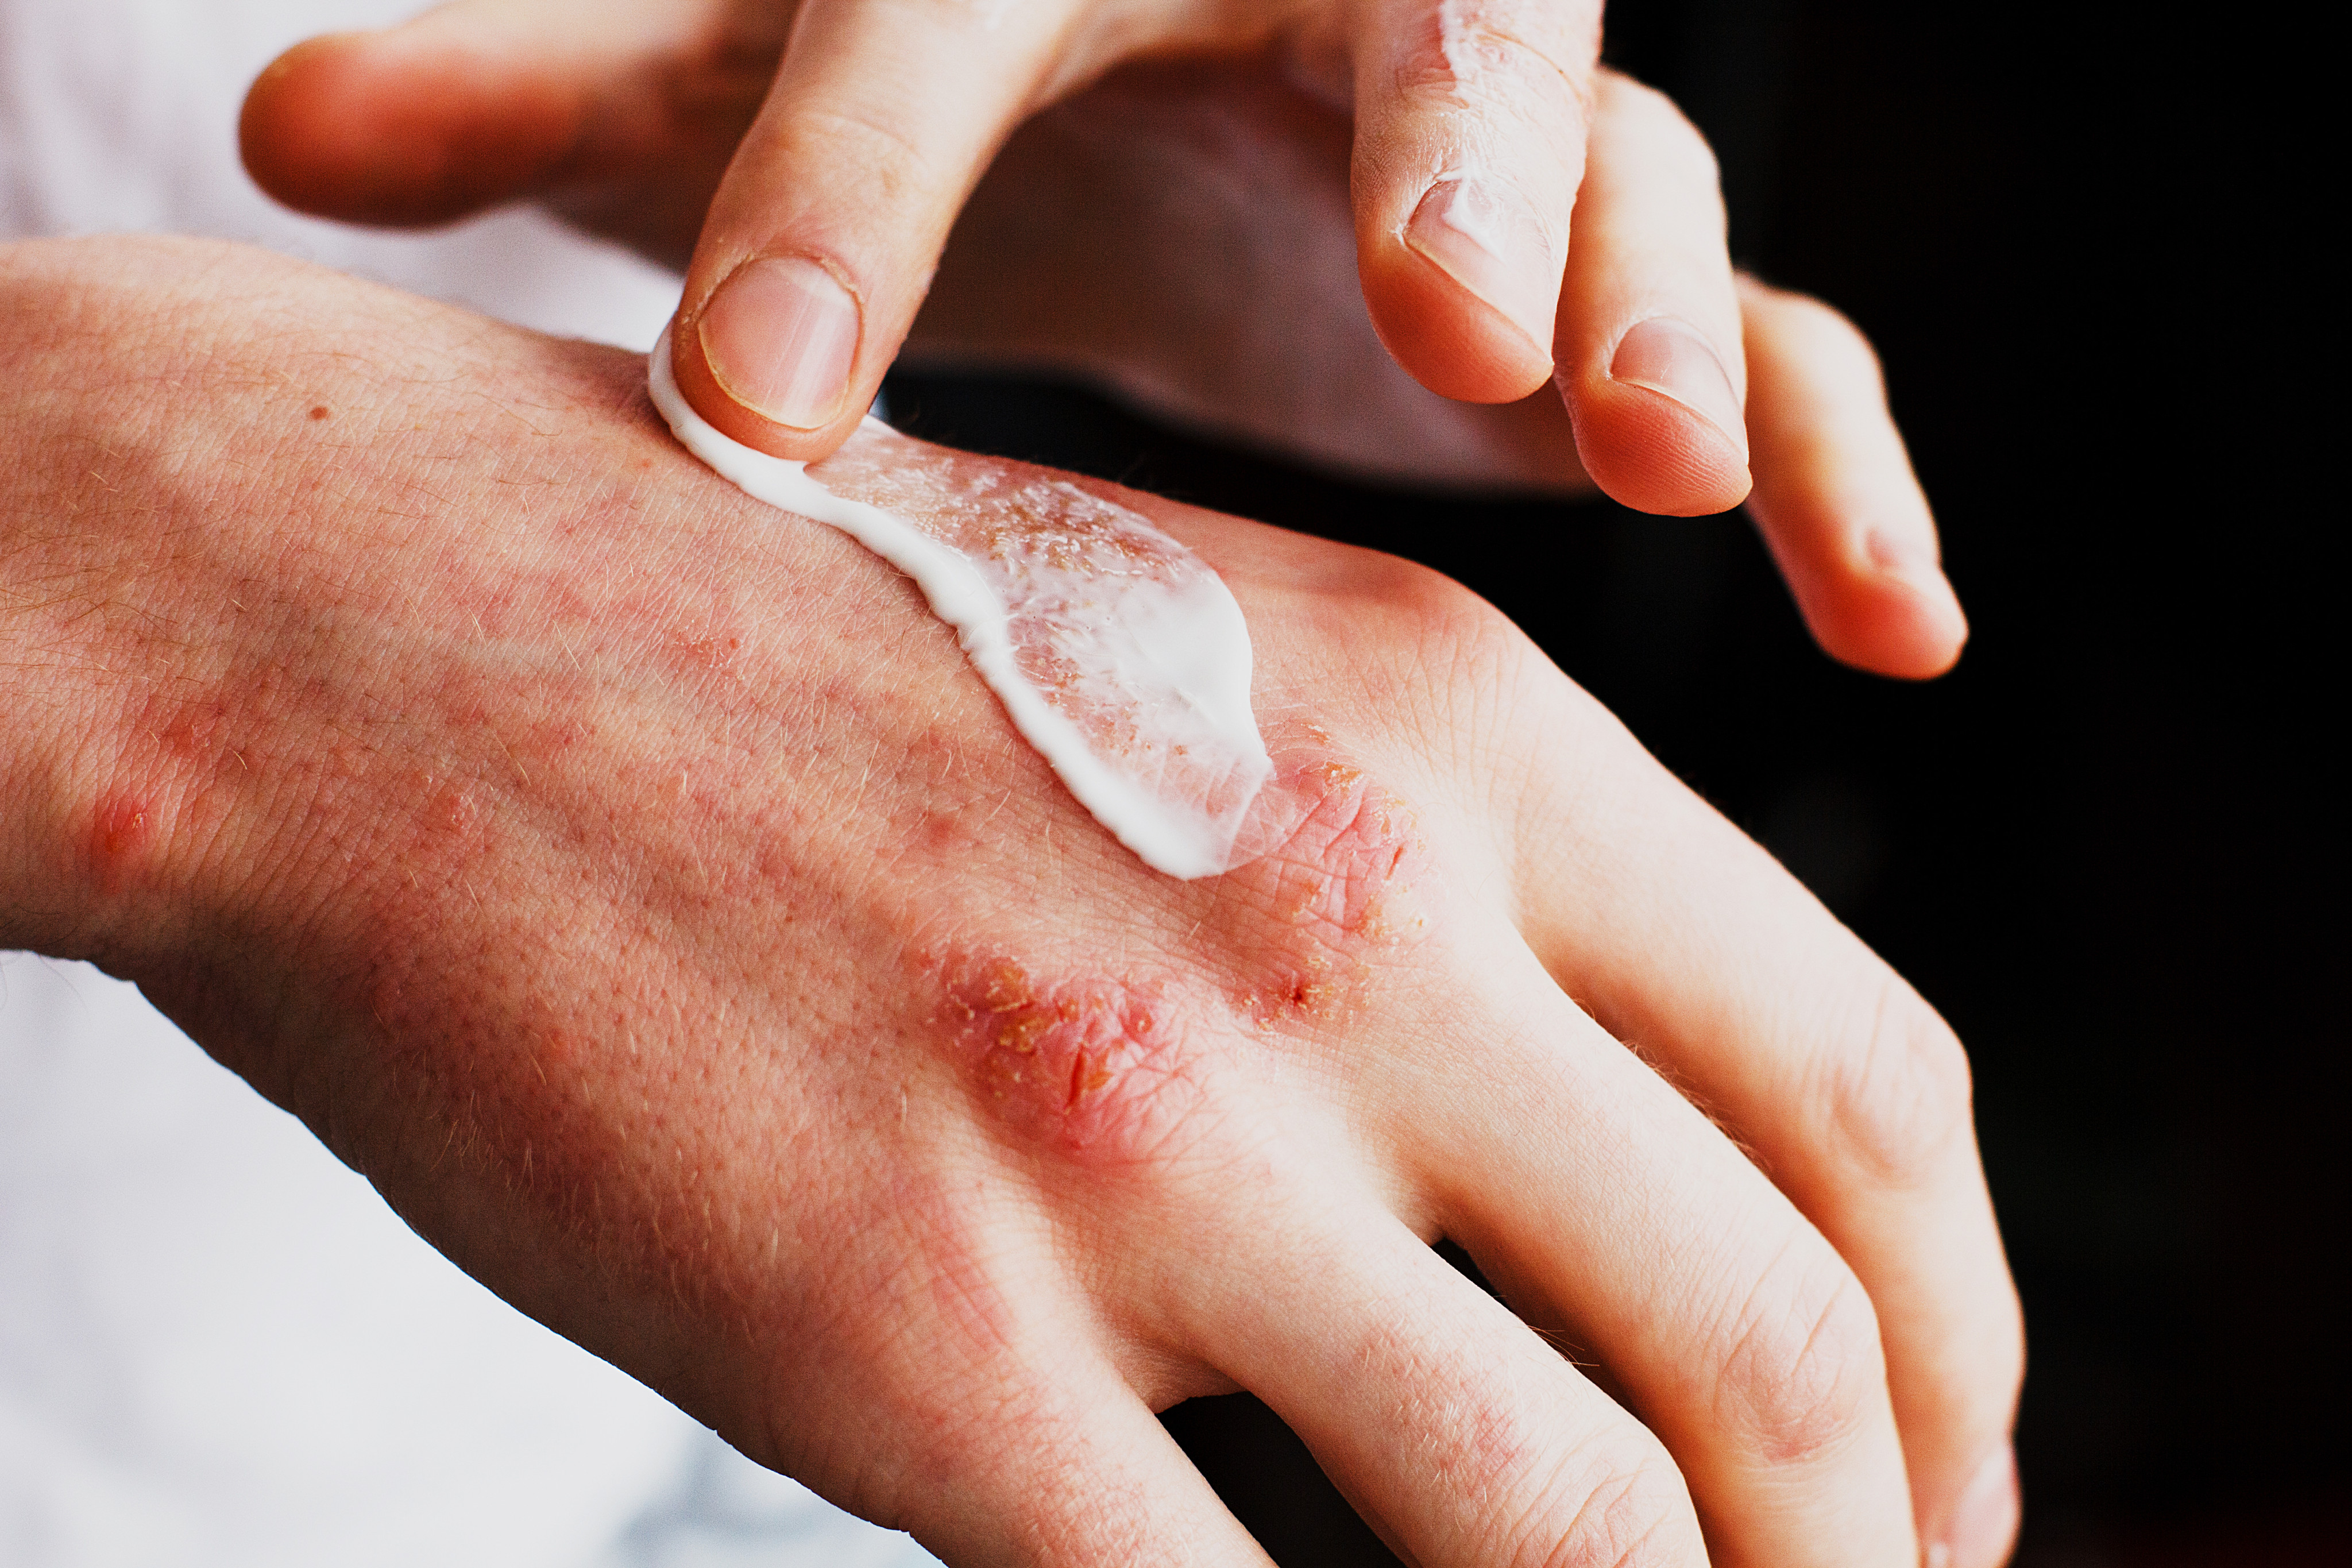 Authorities in Singapore are warning consumers about eczema cream laced with arsenic 430 times allowable limits. Photo: Shutterstock